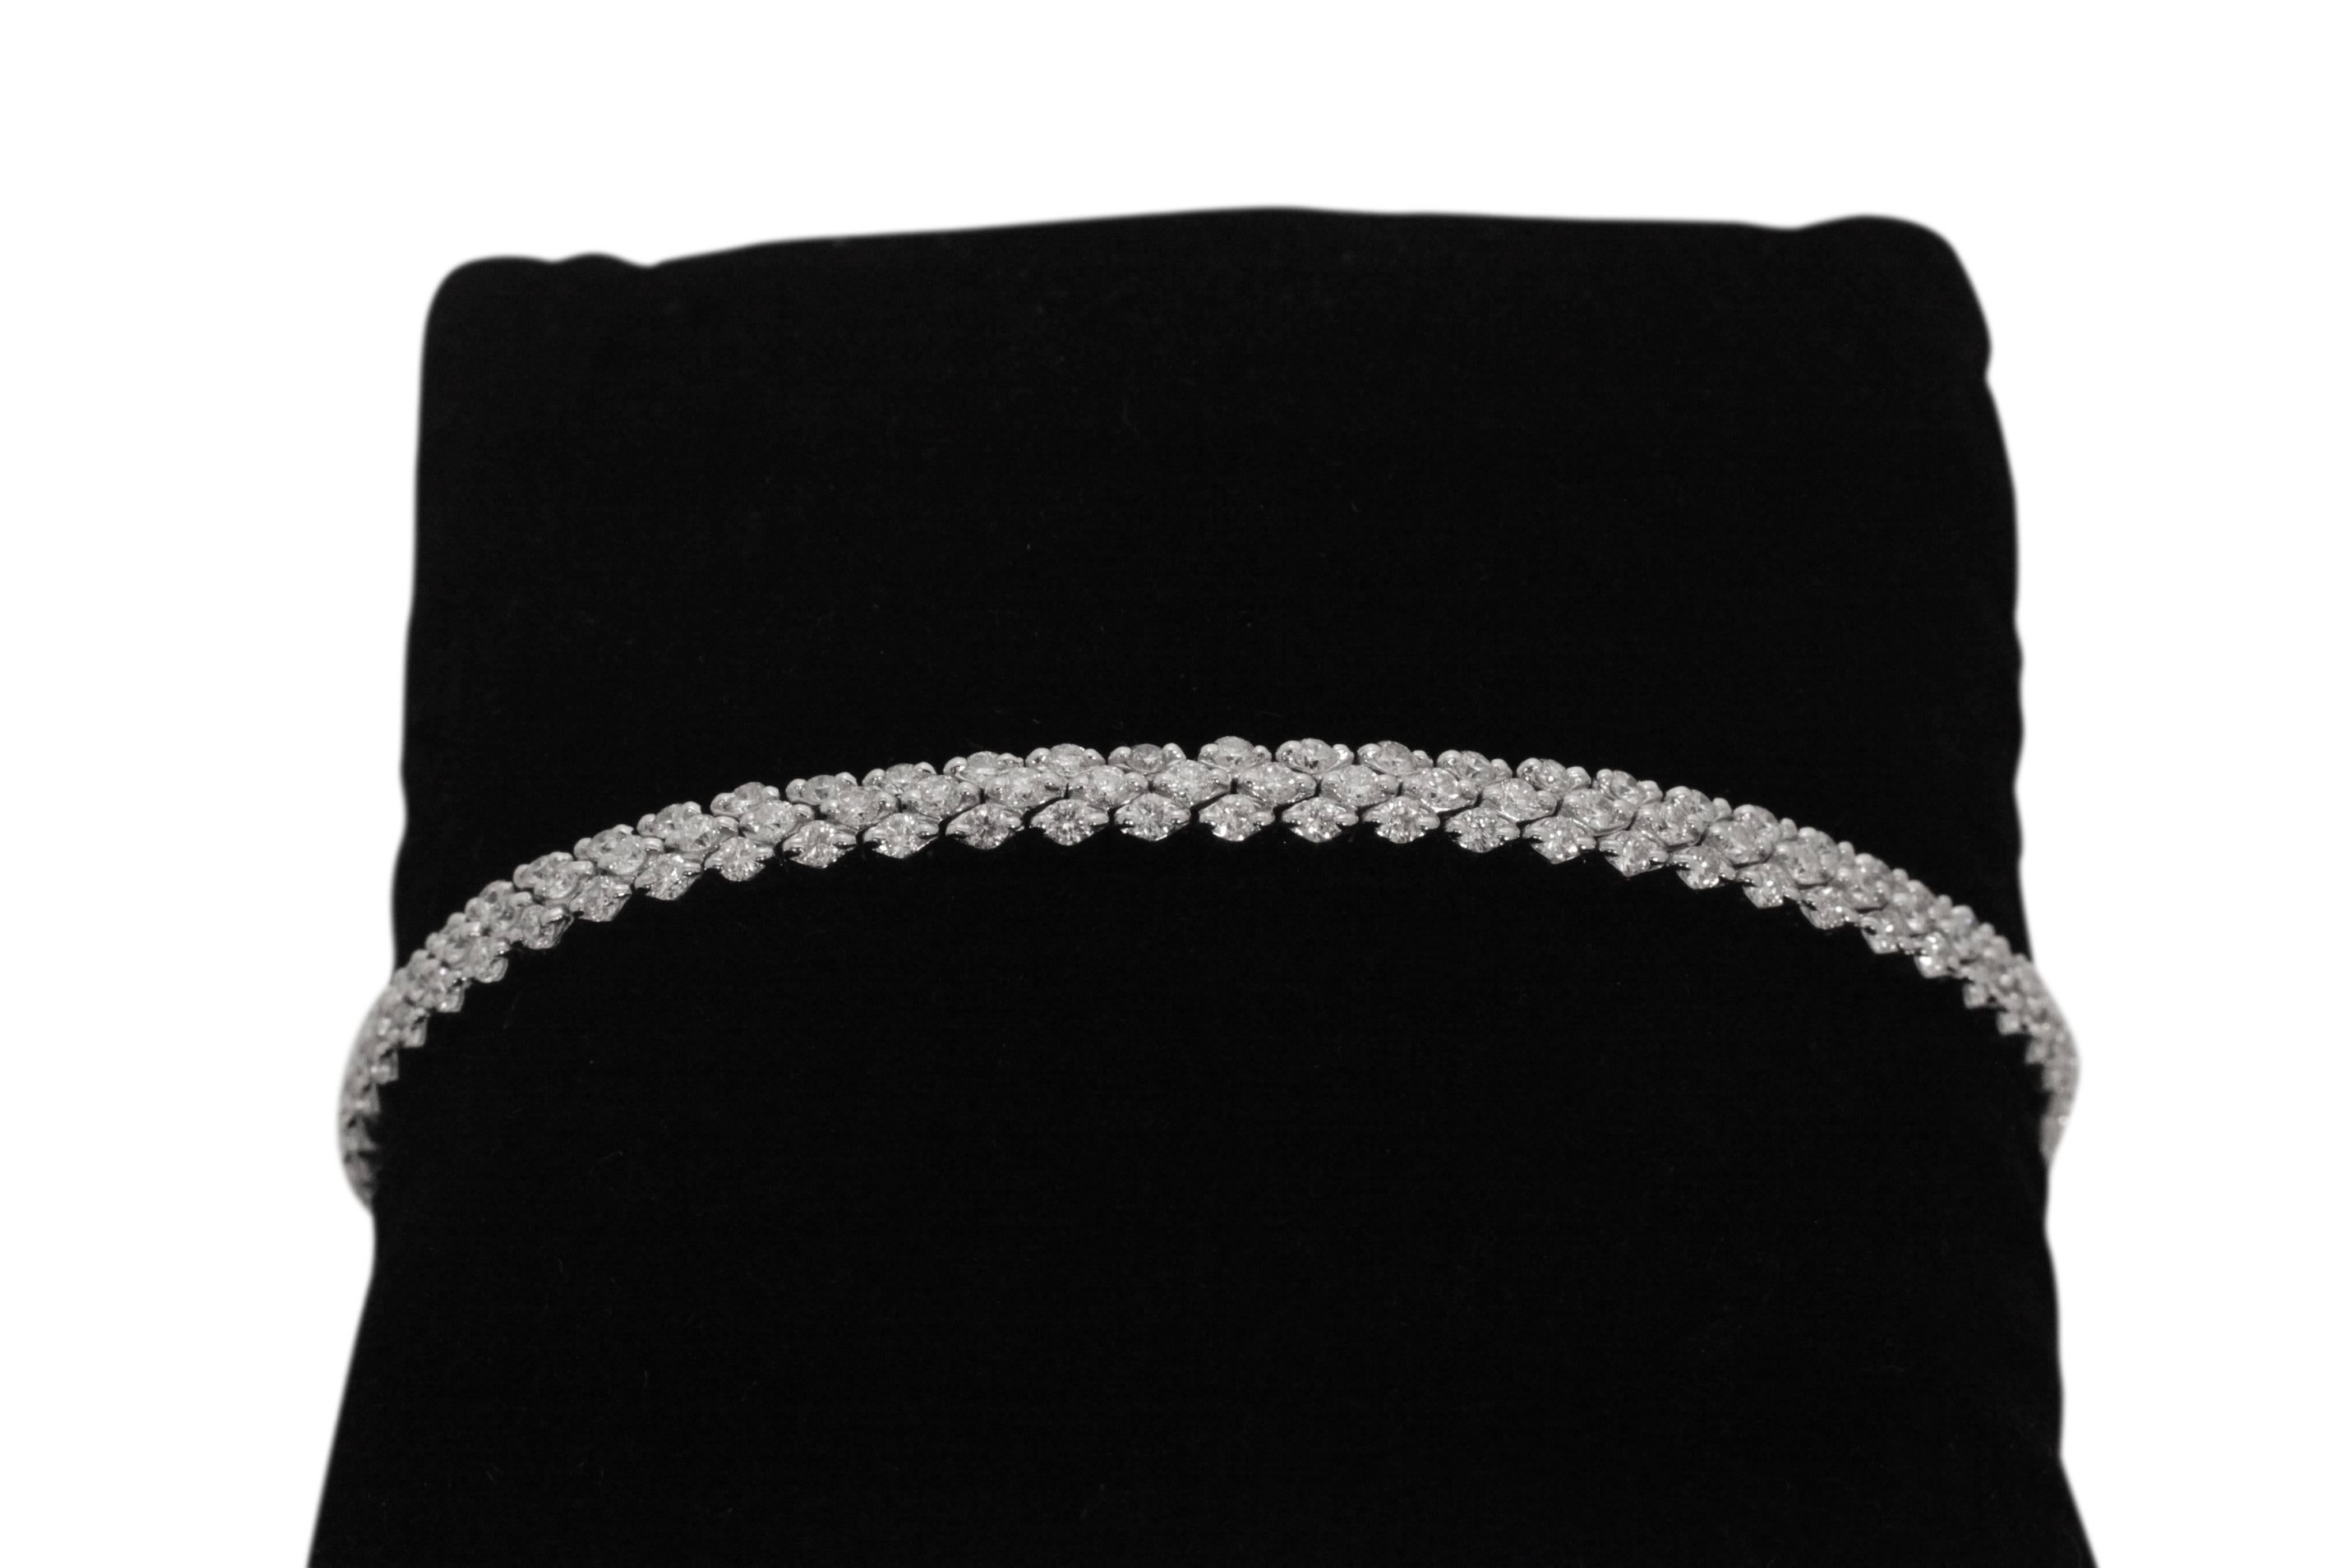 Ferrucci 2.60 carats G color diamonds set in an exquisite Triple Diamond Italian Tennis bracelet, entirely made in 18k Italian white gold, made in Valenza Italy, famous jewelry city for many generations, exporting the Jewelry Made in Italy in the